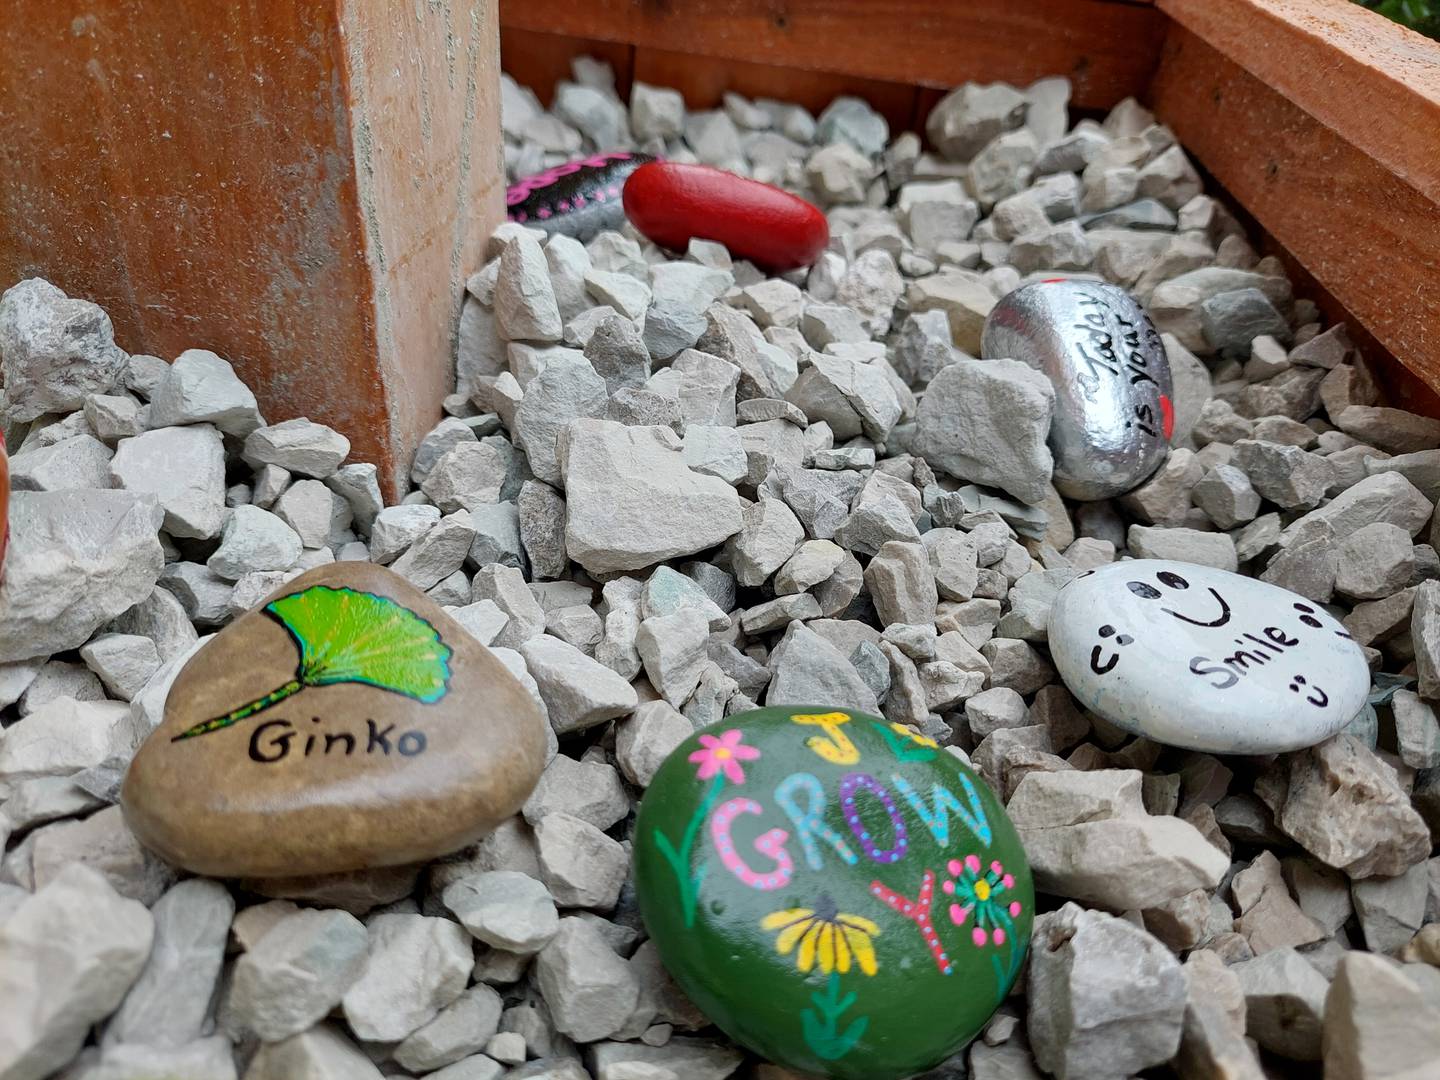 In addition to the Free Little Art Gallery, a rock garden has been installed at the base of the gallery where anyone can take and or leave painted rocks. Rocks often feature uplifting messages and can be found randomly placed or "hidden" around town.